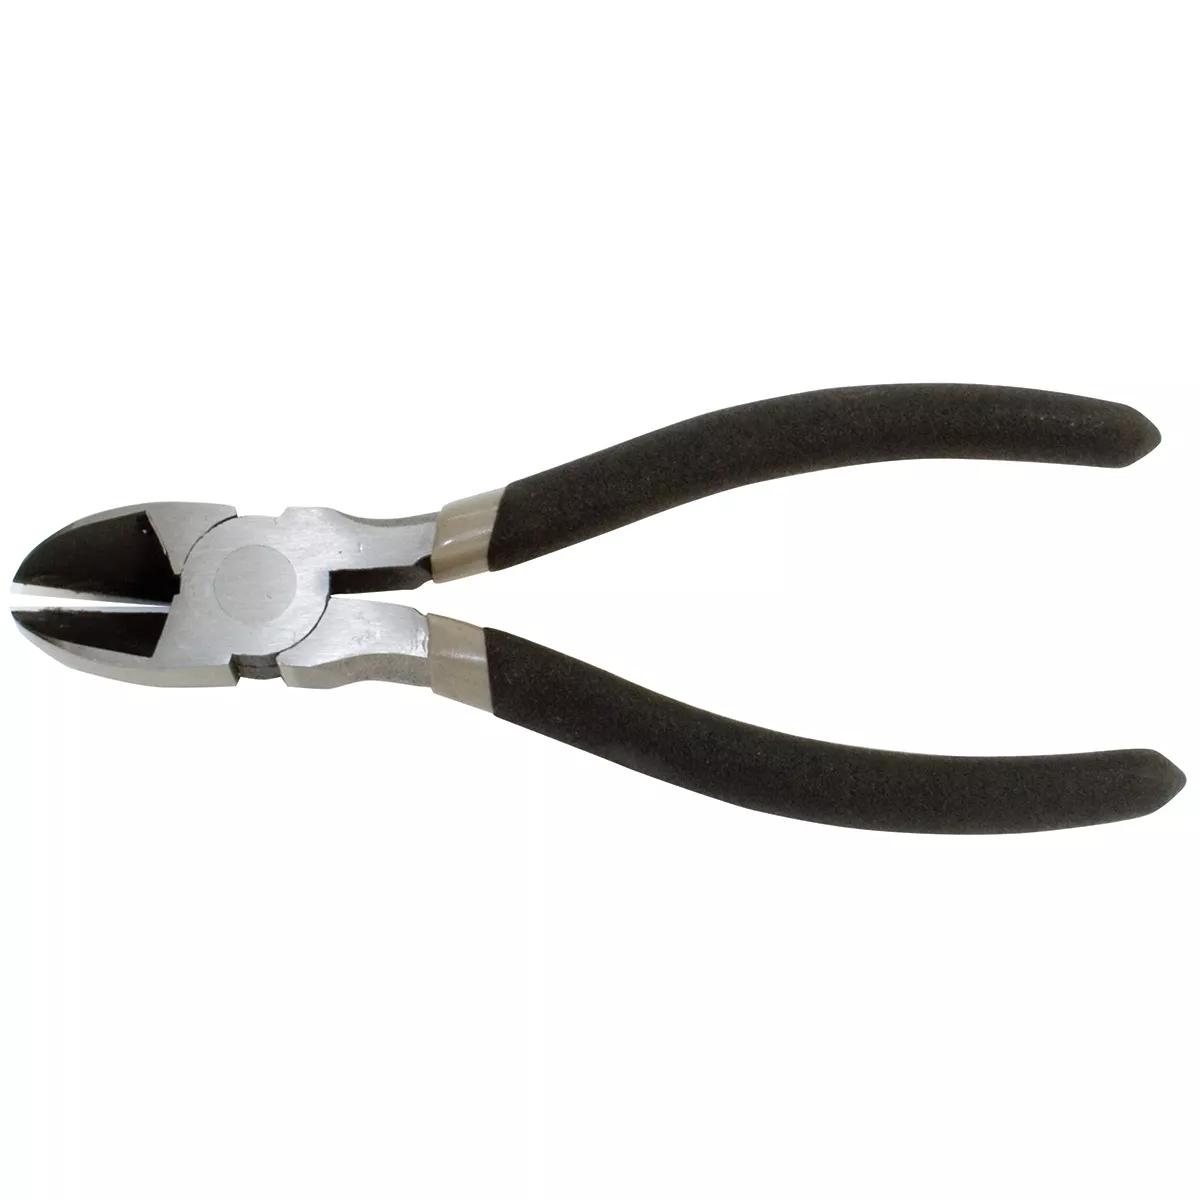 6" Solid Joint Diagonal Cutters